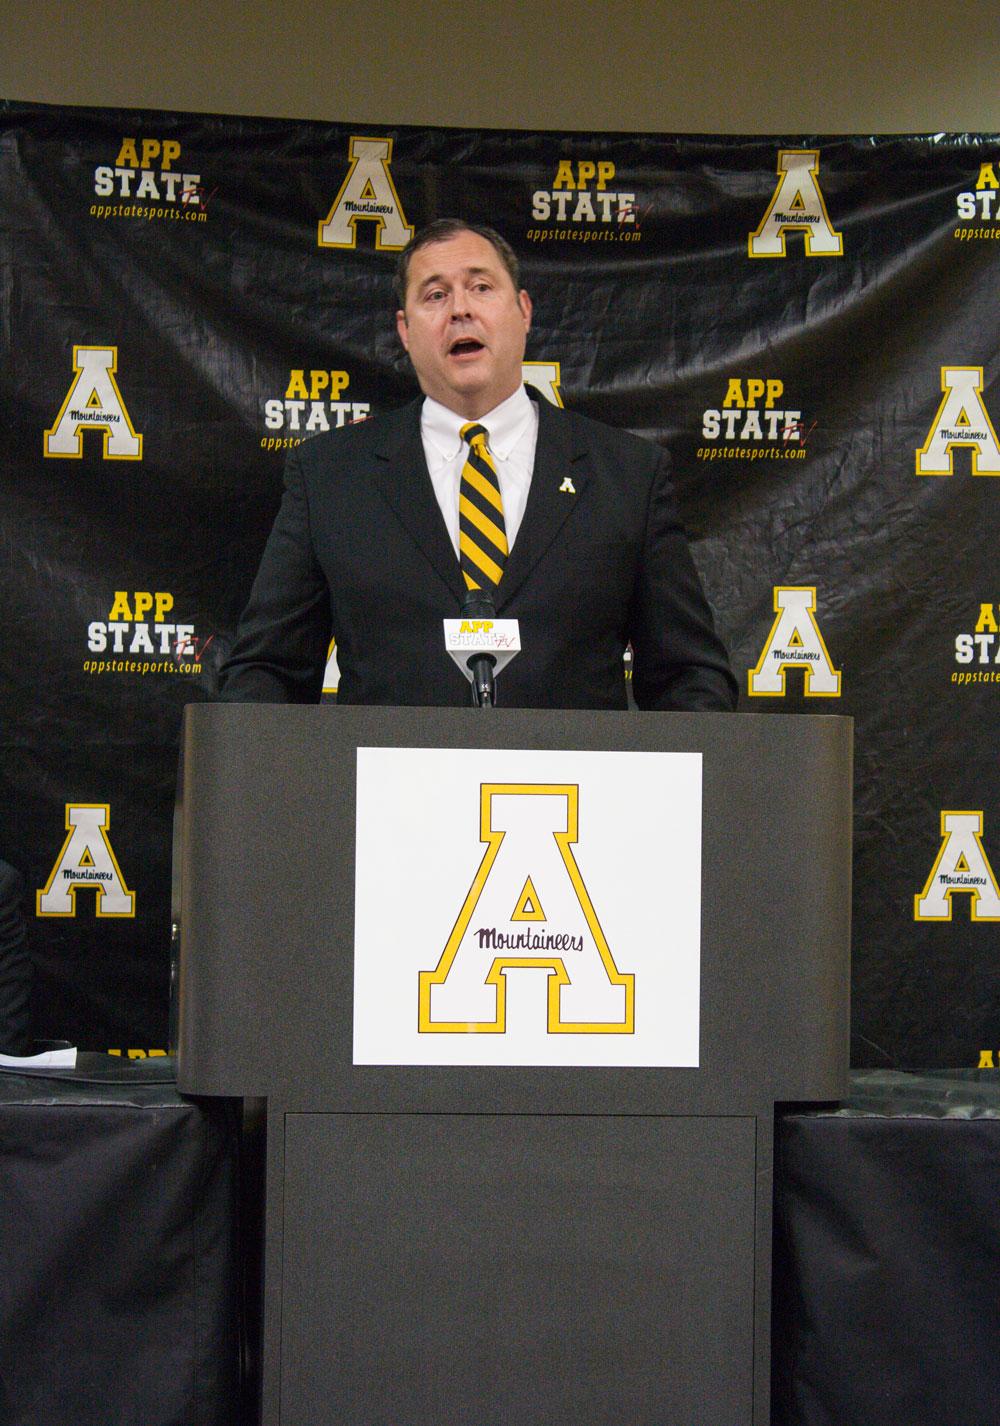 Charlie+Cobb+is+leaving+Appalachian+State+University+Athletics+after+nine+years+as+athletic+director+to+take+the+same+position+at+Georgia+State+University.%0AFile+Photo+%7C+The+Appalachian